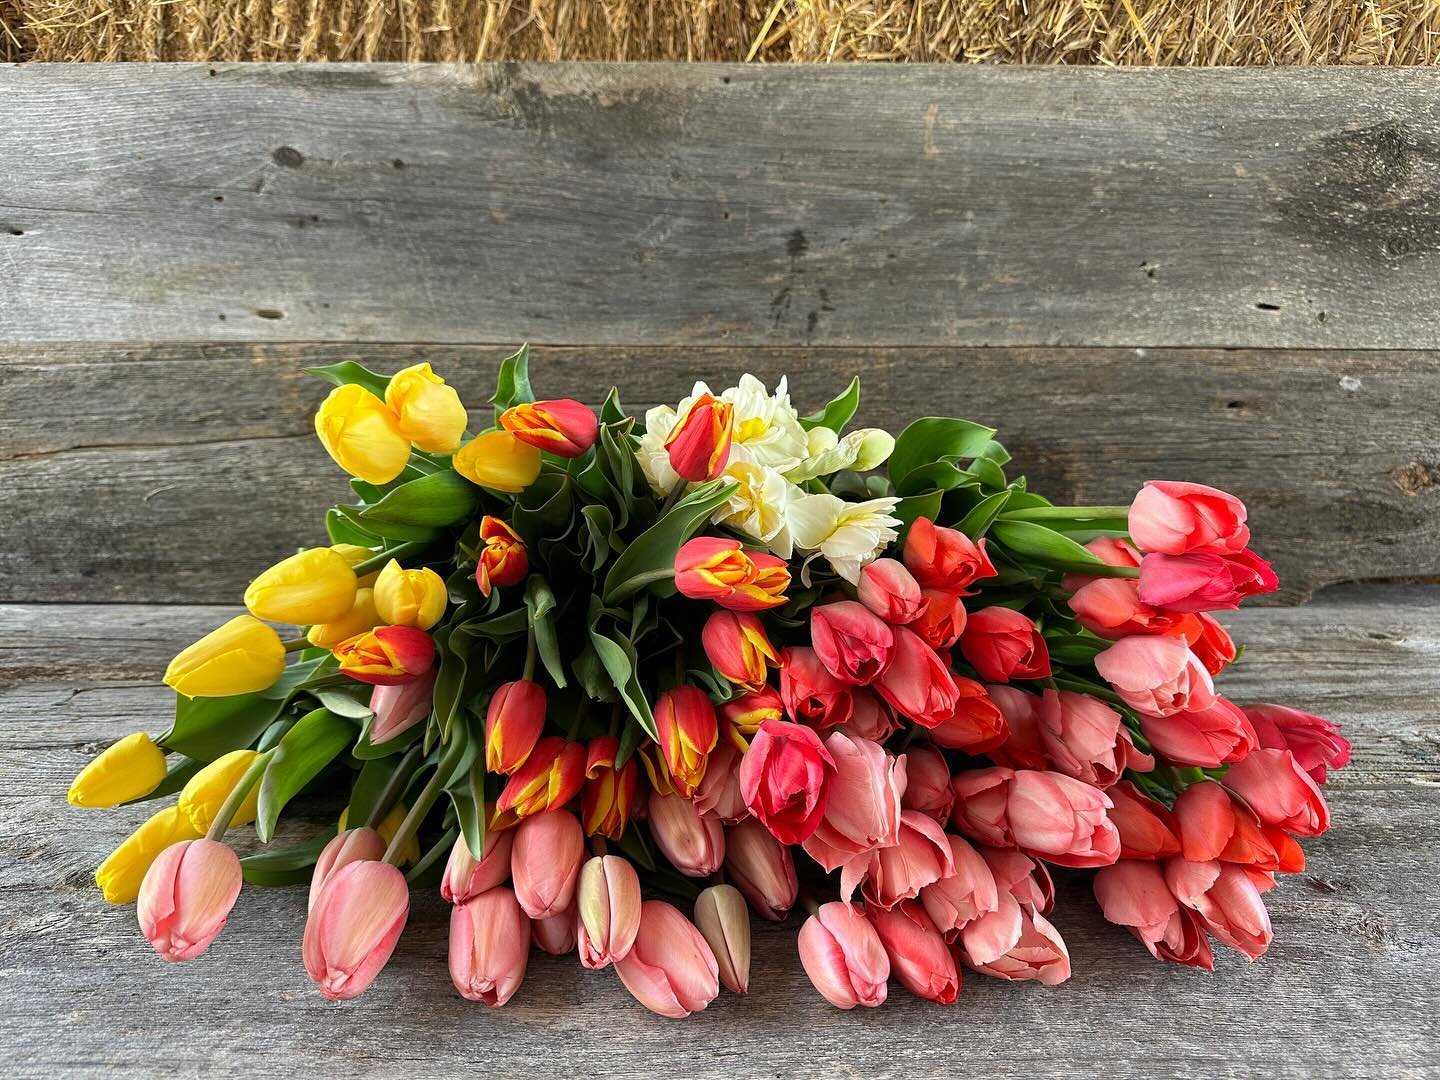 Attention wholesale buyers: Connect with us on @rooted_farmers !
Foliage, single tulips, and potted herbs, with more to come &hellip;
#localflowers #ctgrown #ctflowers #litchfieldcounty #newmilford #washingtondepot